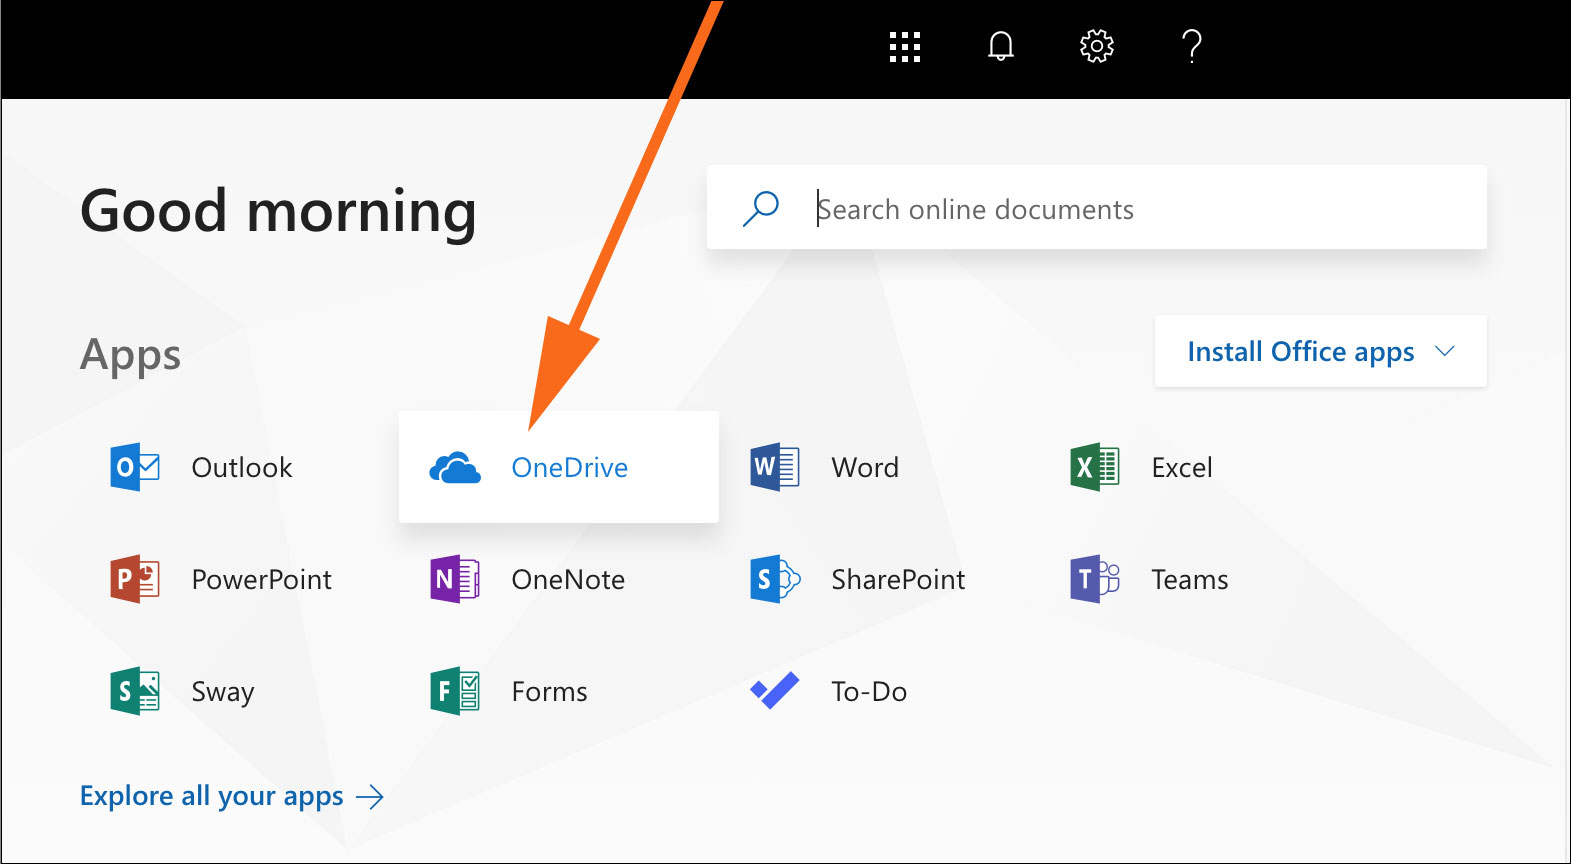 Select OneDrive after logging into the portal.